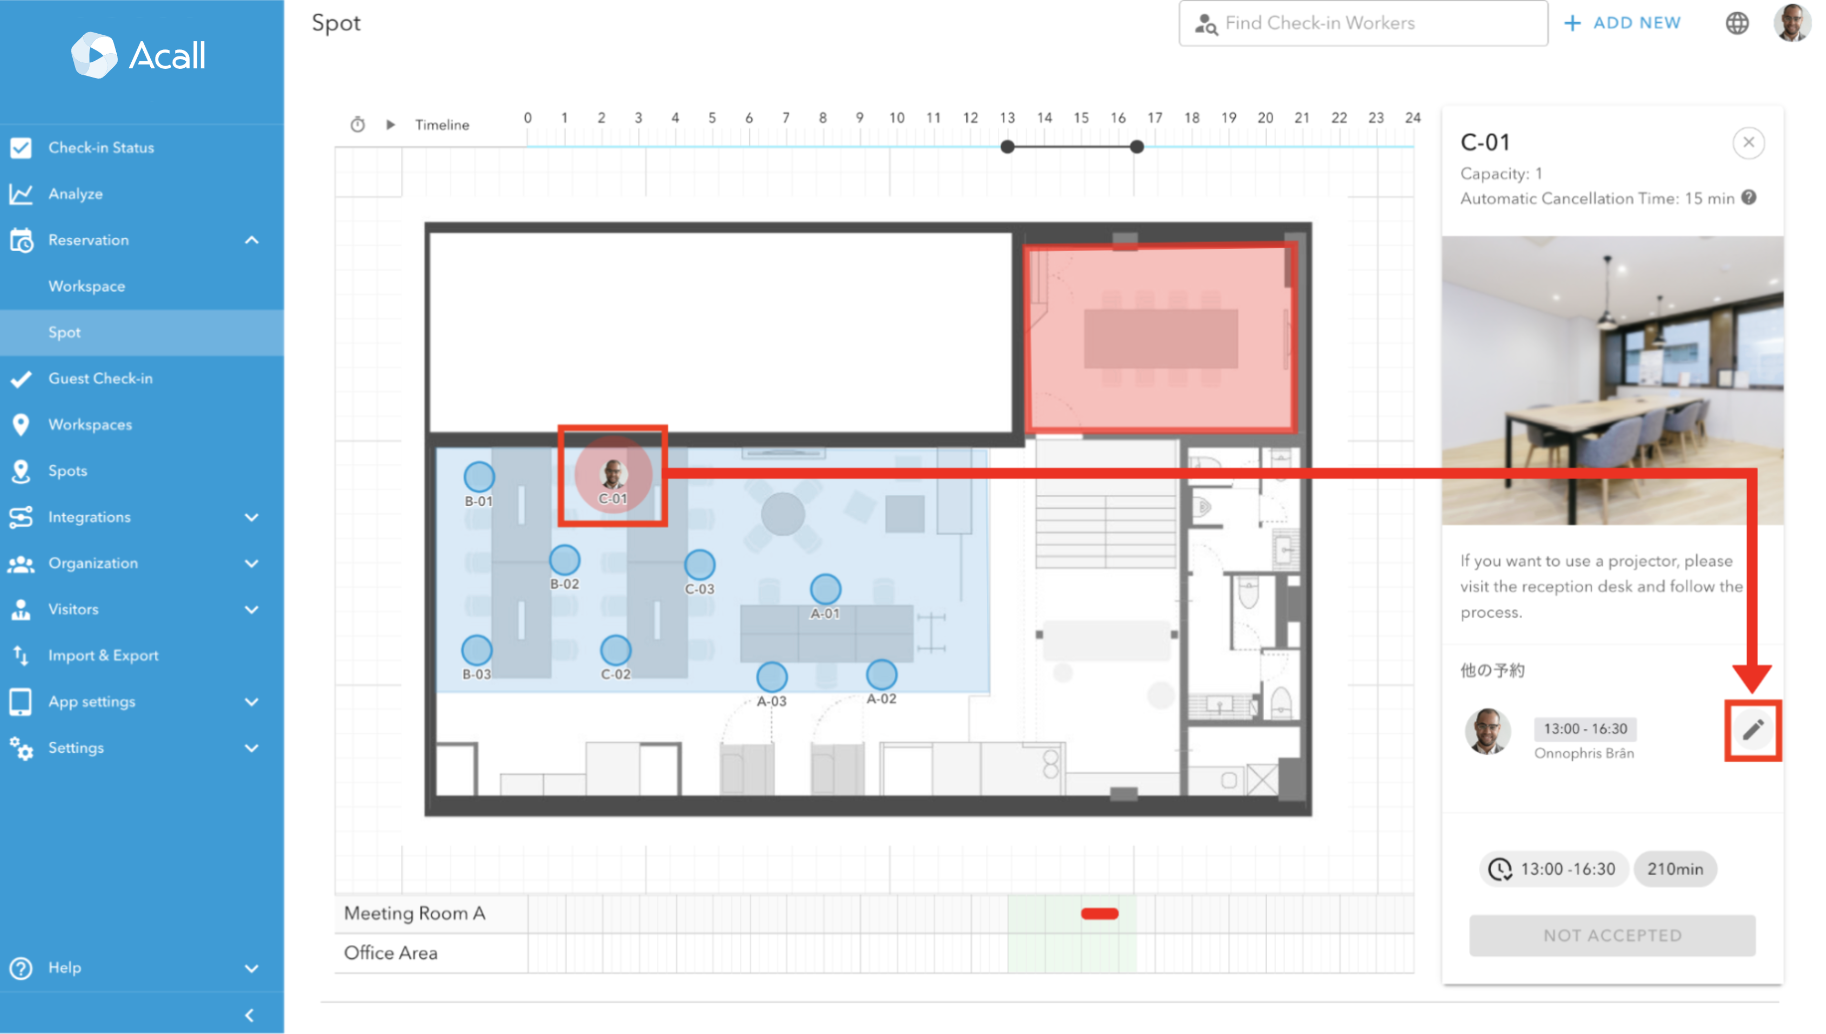 Reserve Your Spot on Floor Map on Acall Portal12.png